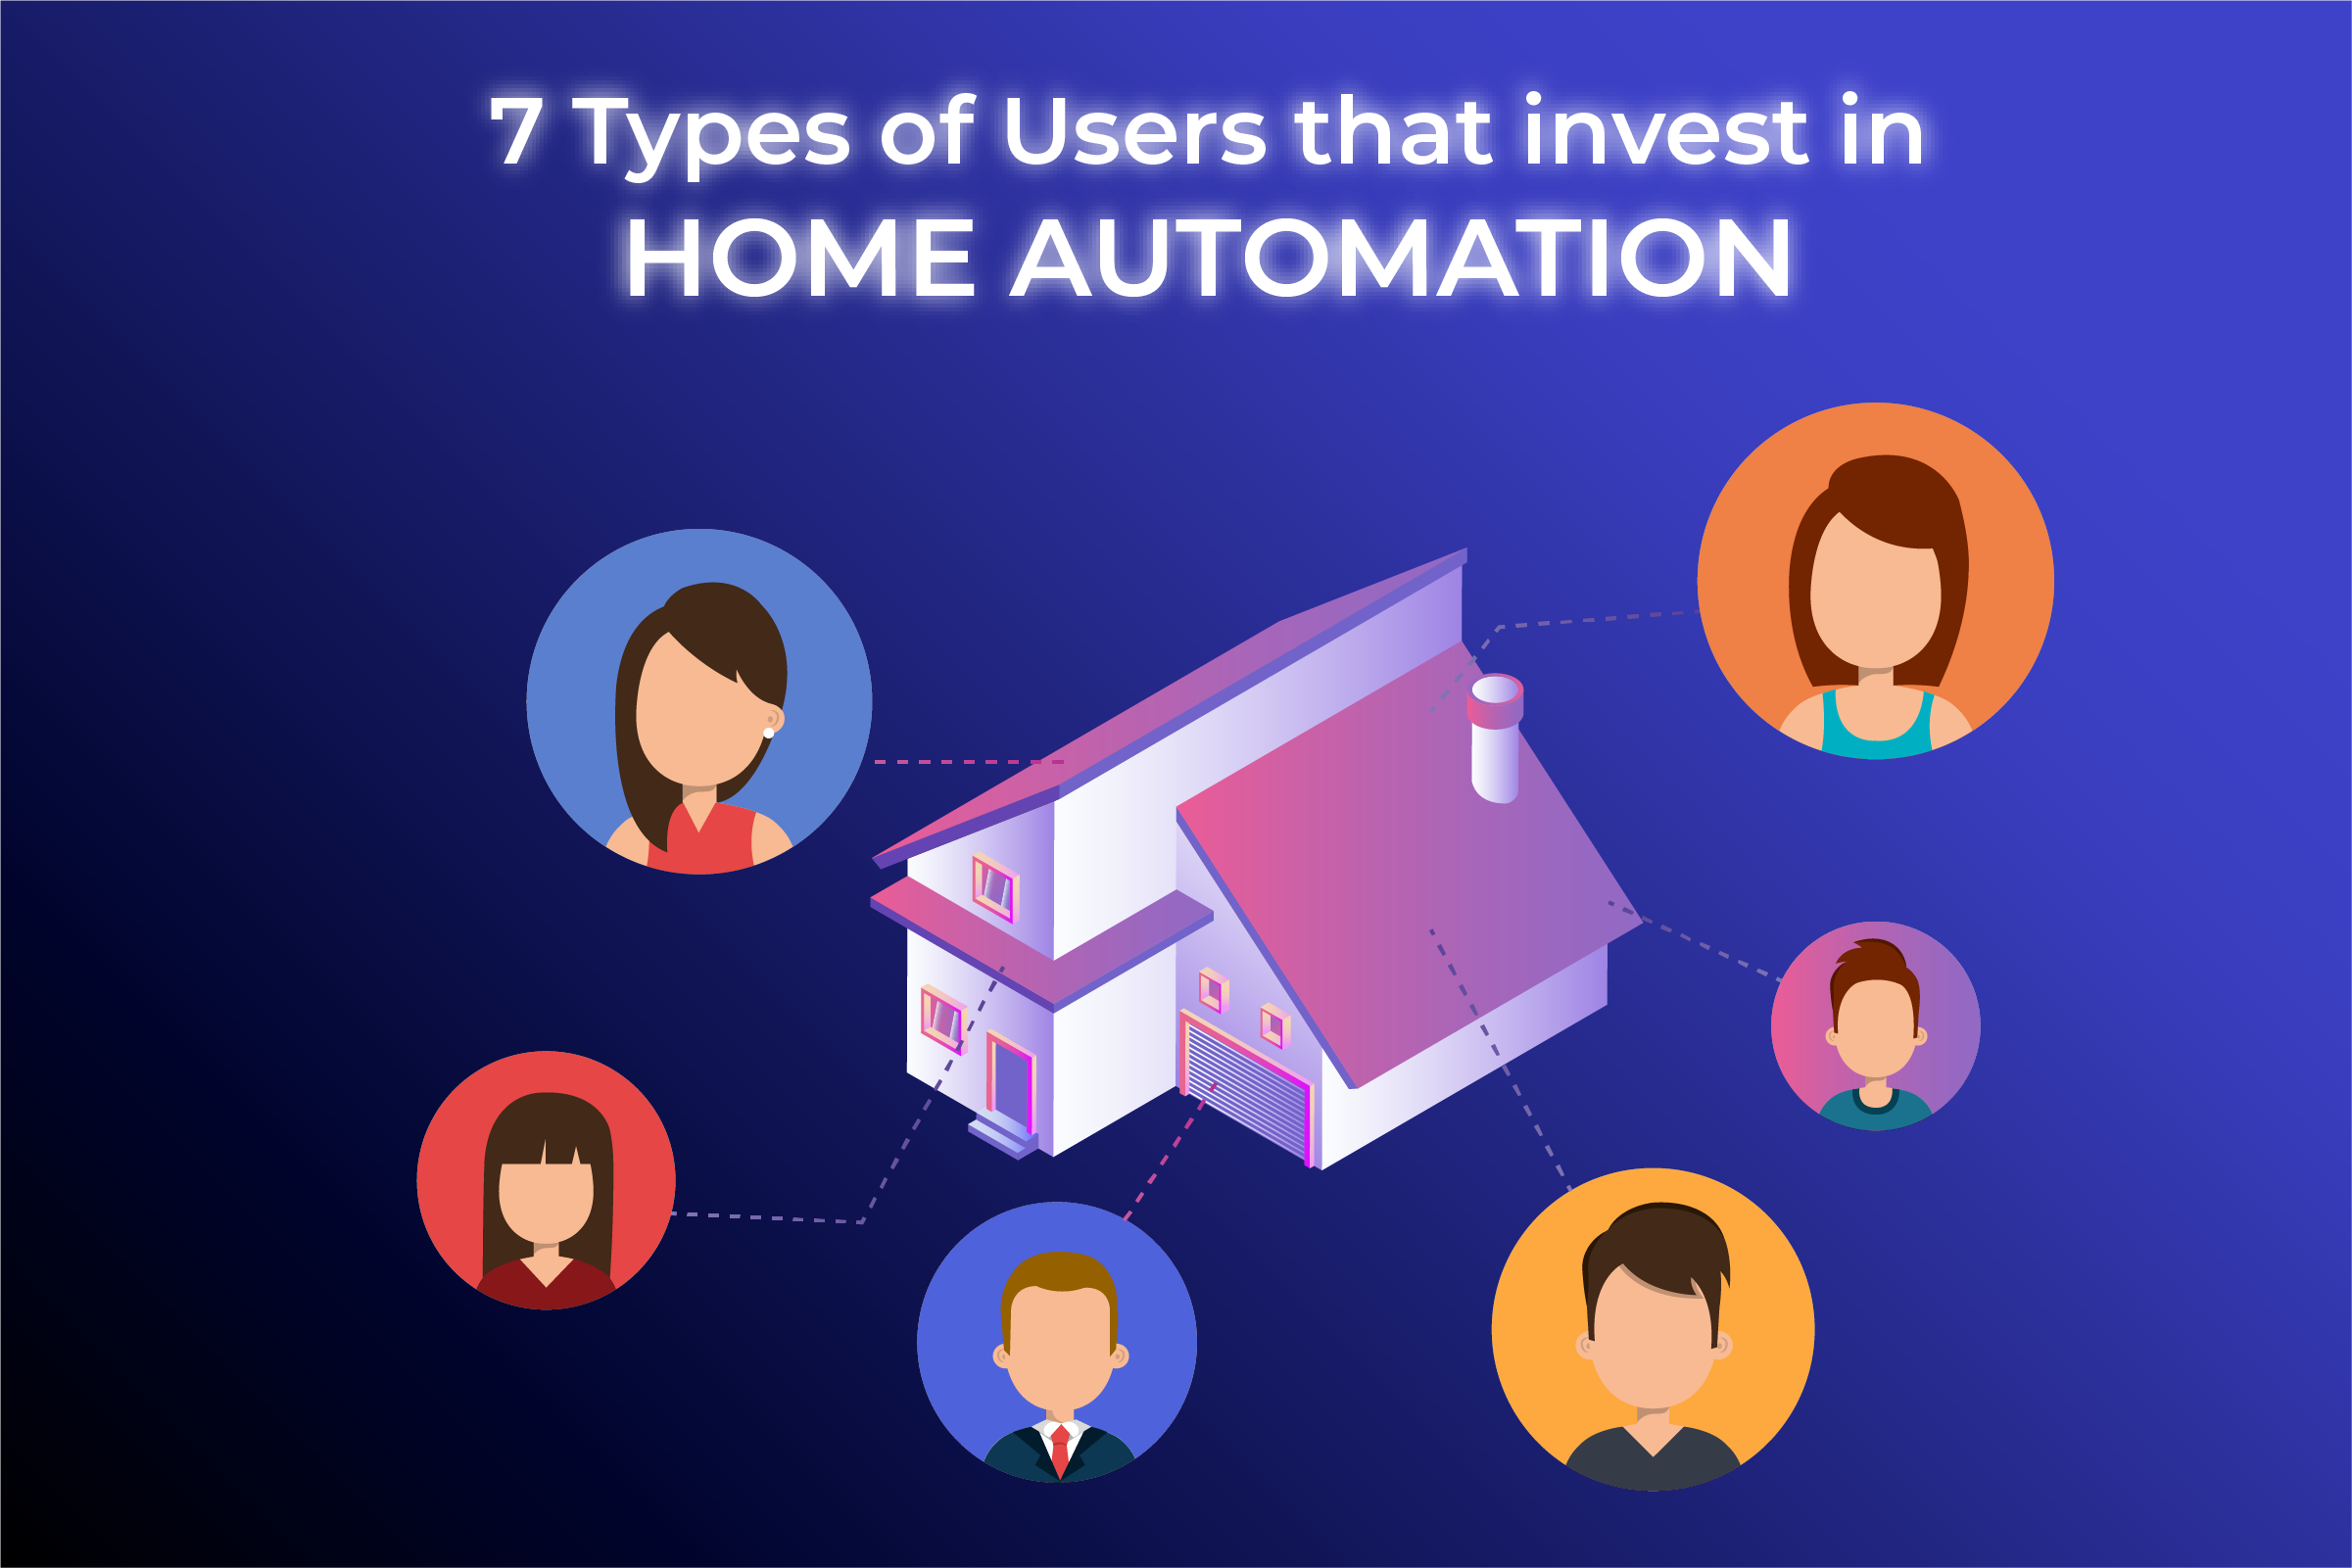 7 Types of Users that invest in Home Automation